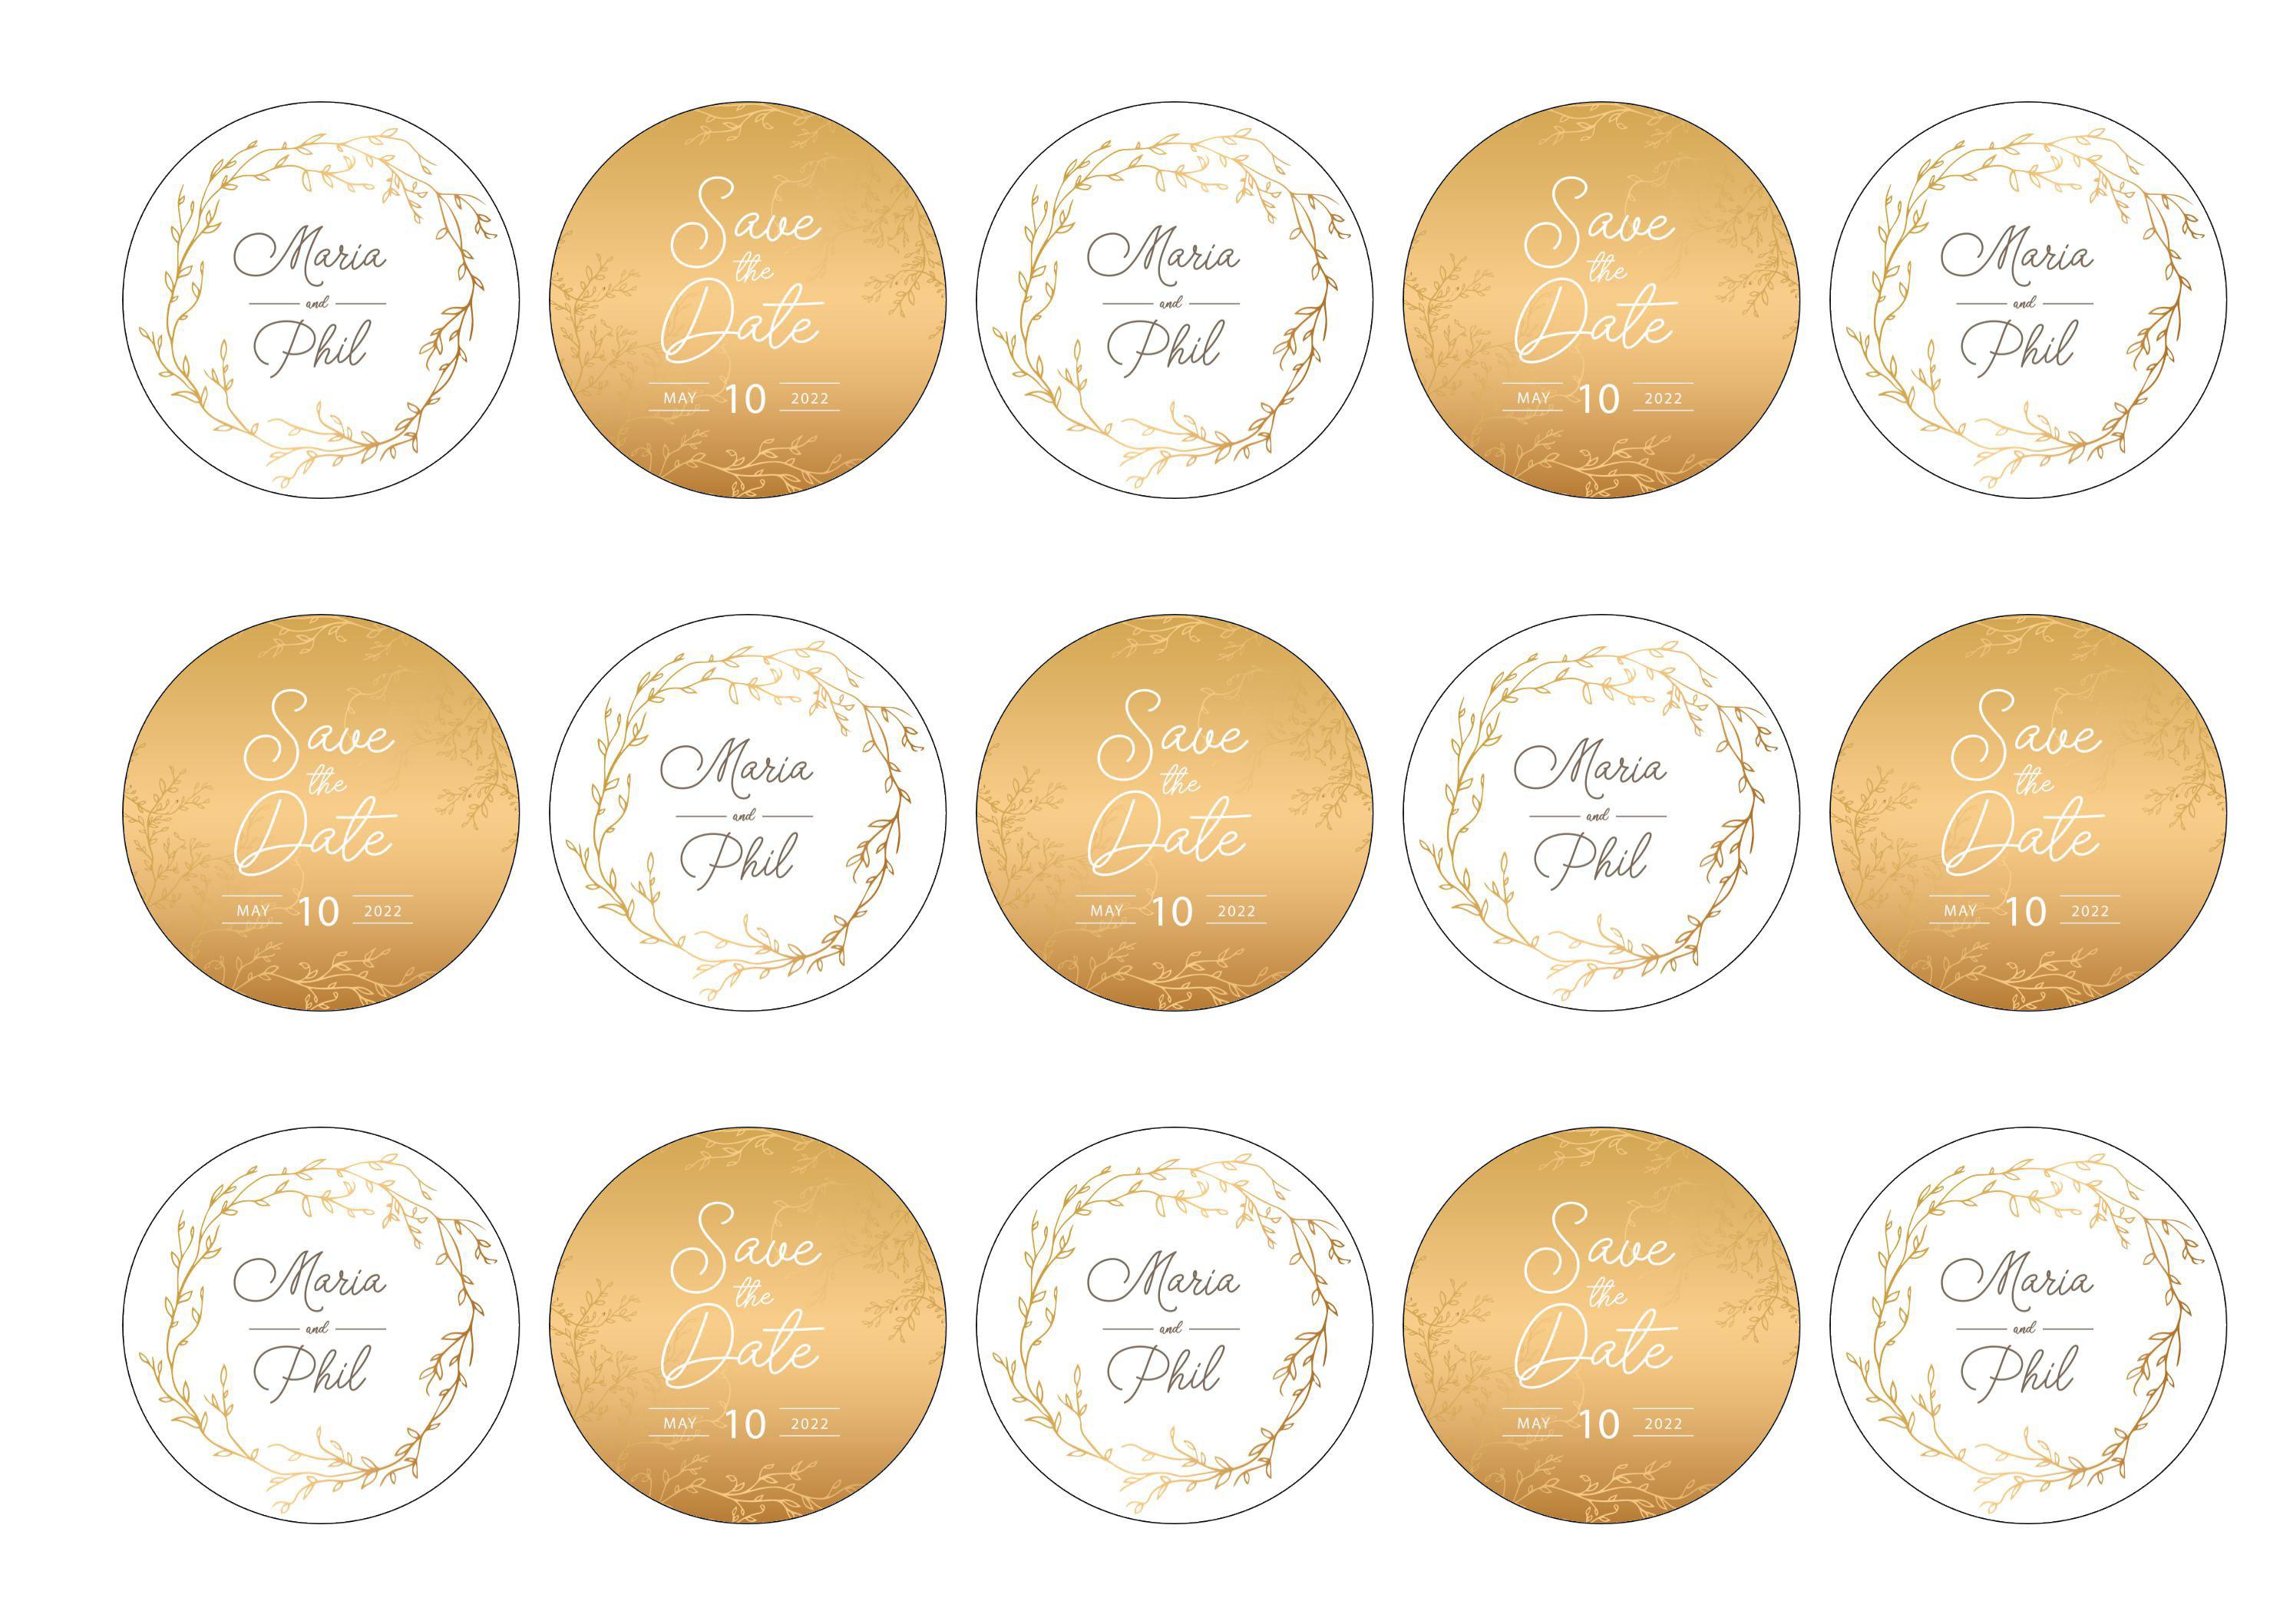 Save The Date wedding cupcake toppers personalised